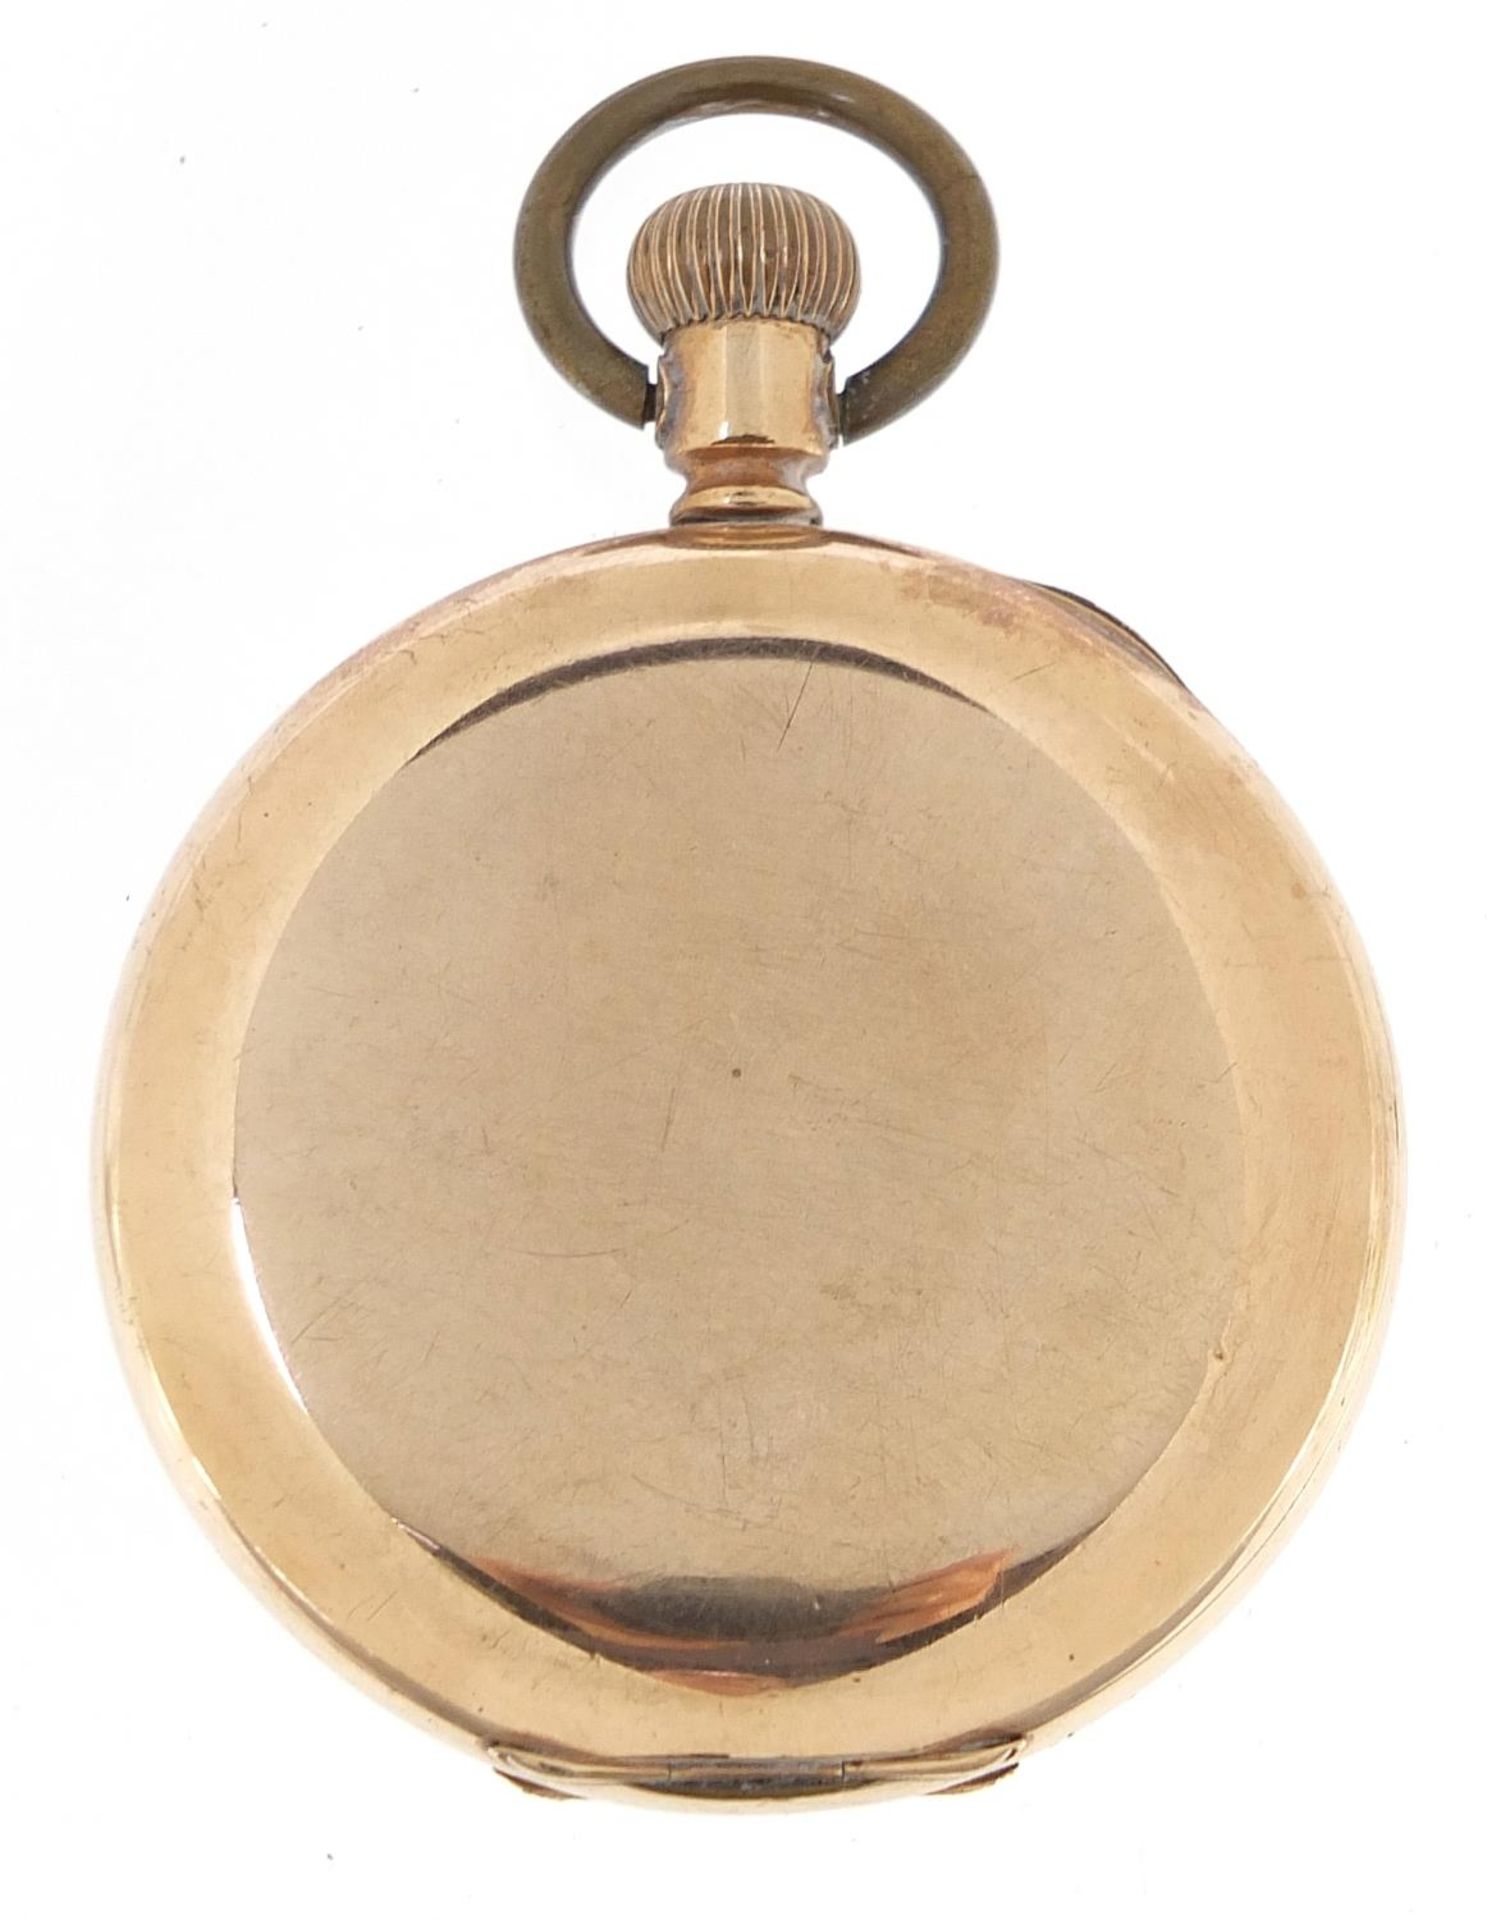 Elgin gold plated full hunter pocket watch, the movement numbered 15028339, 50mm in diameter - Image 3 of 5